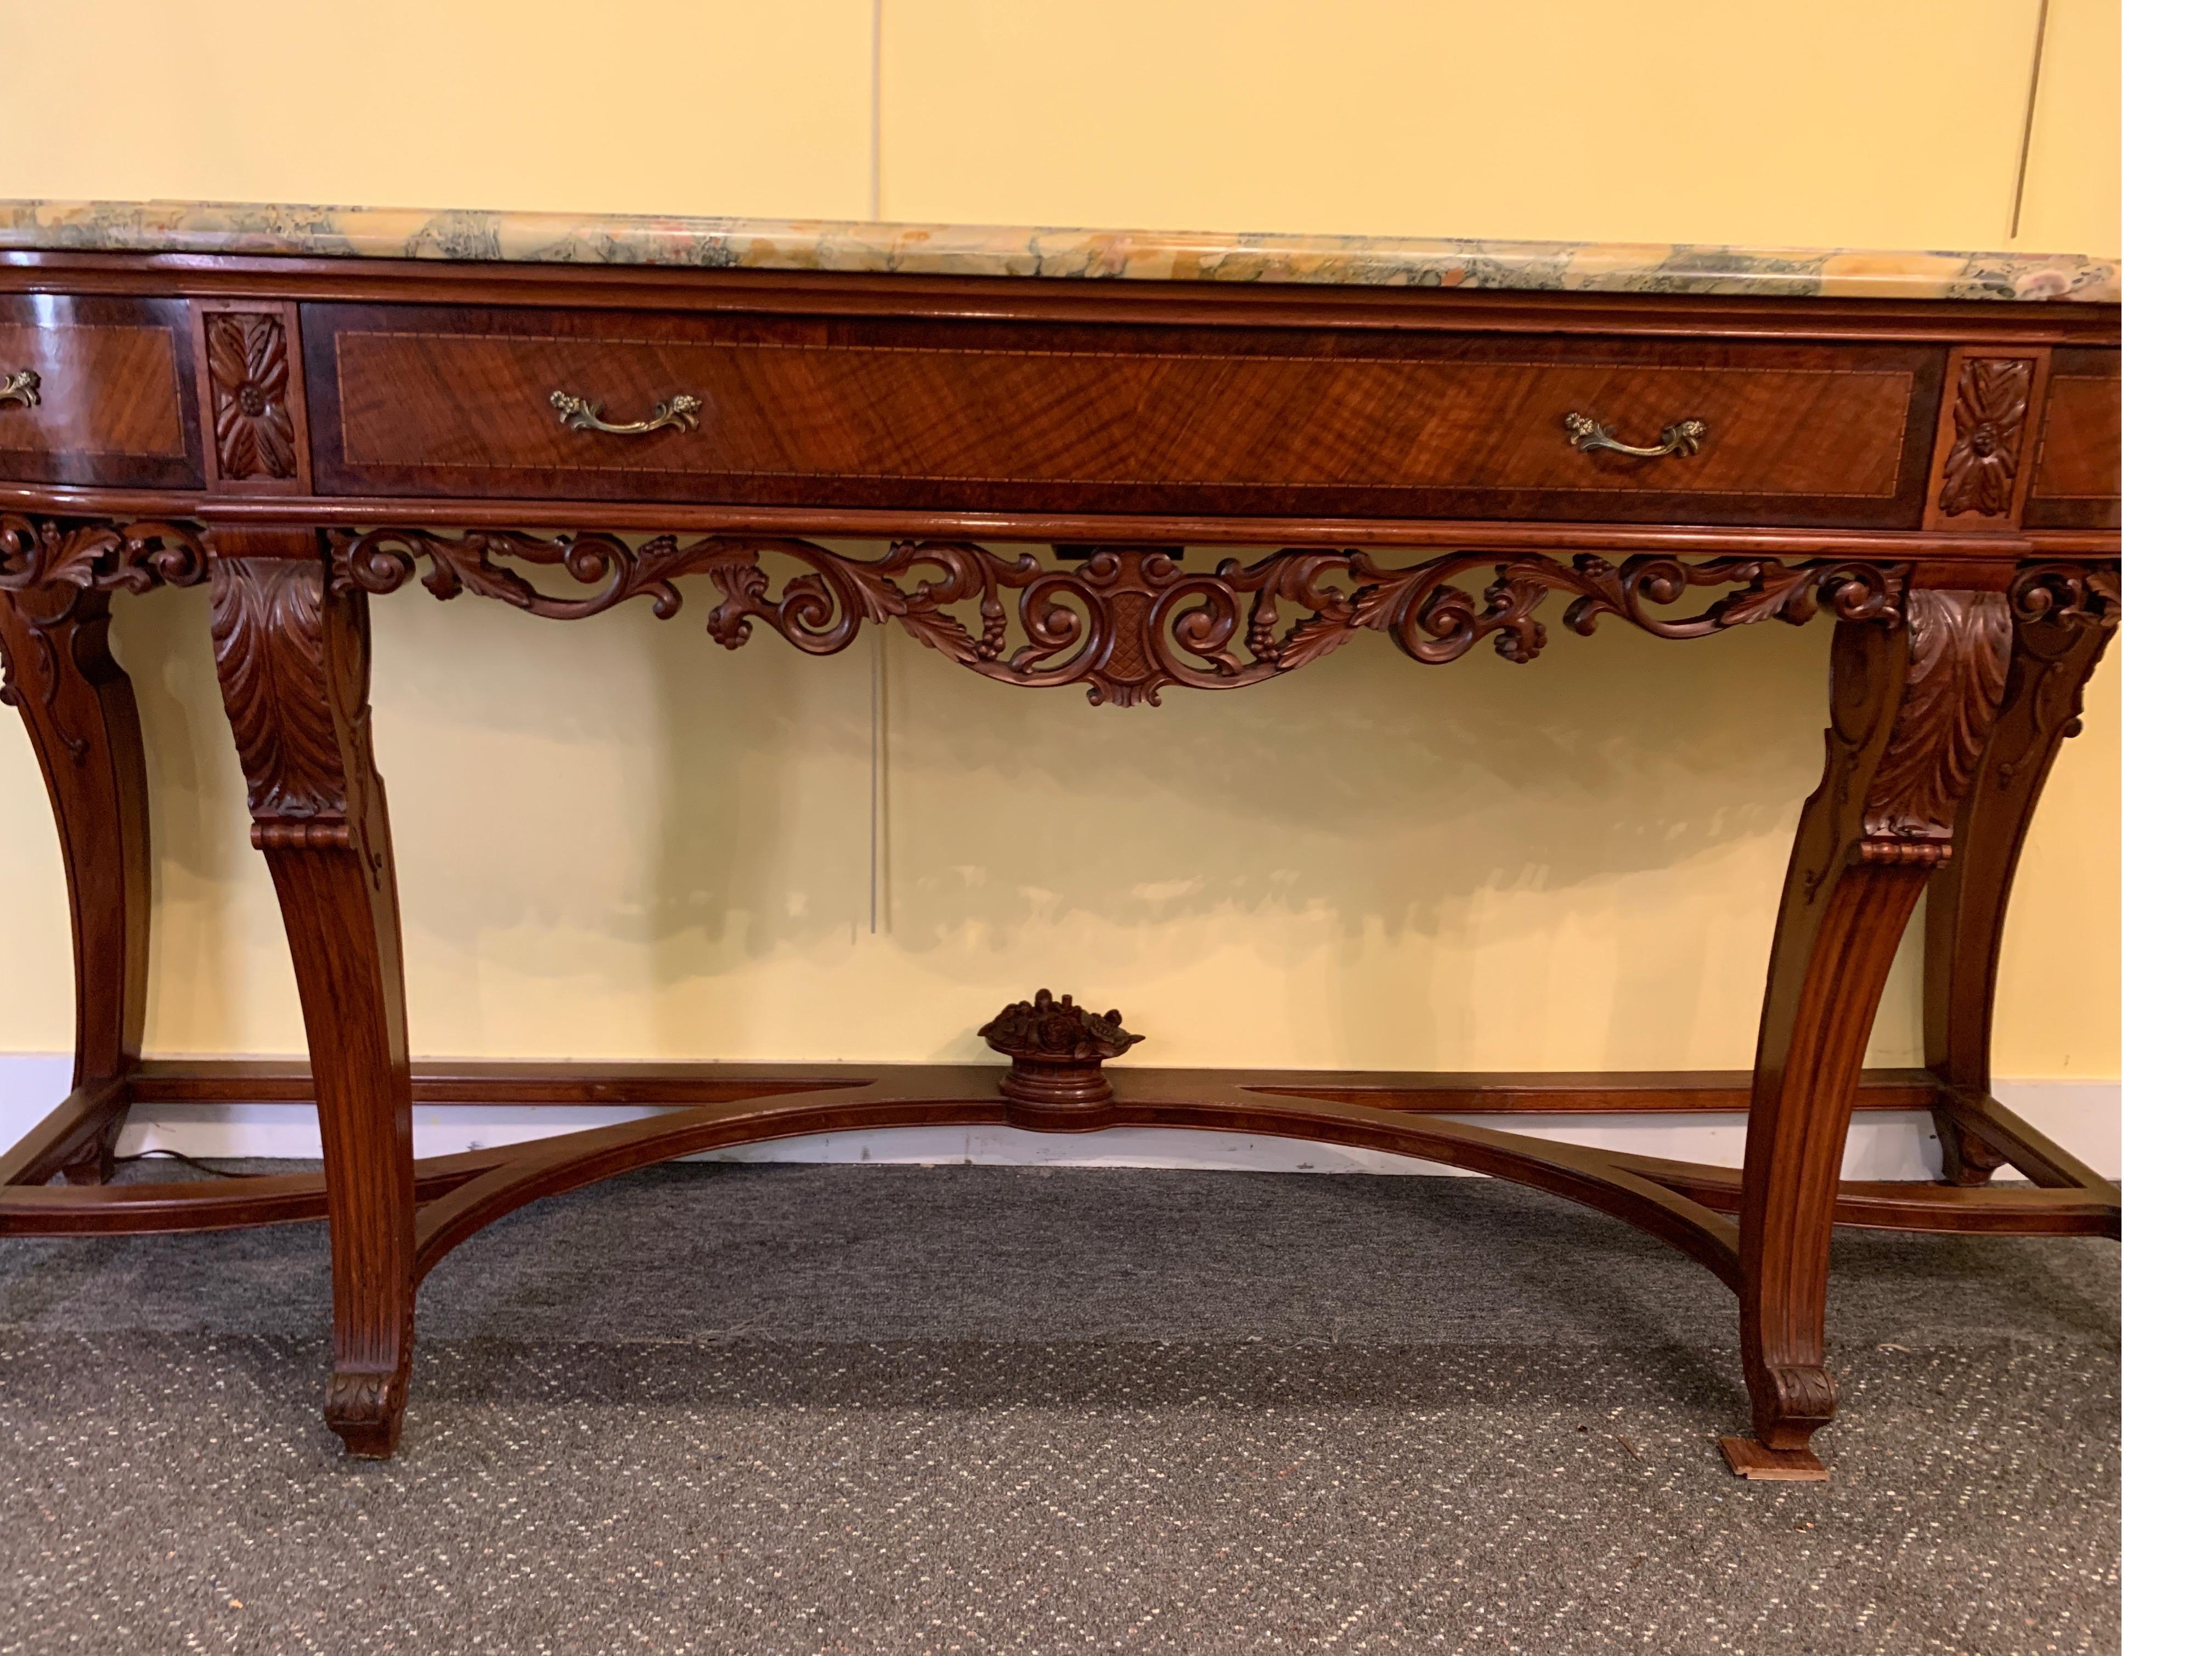 European Continental Carved Walnut and Inlaid Marble-Top Console/Sideboard, circa 1900